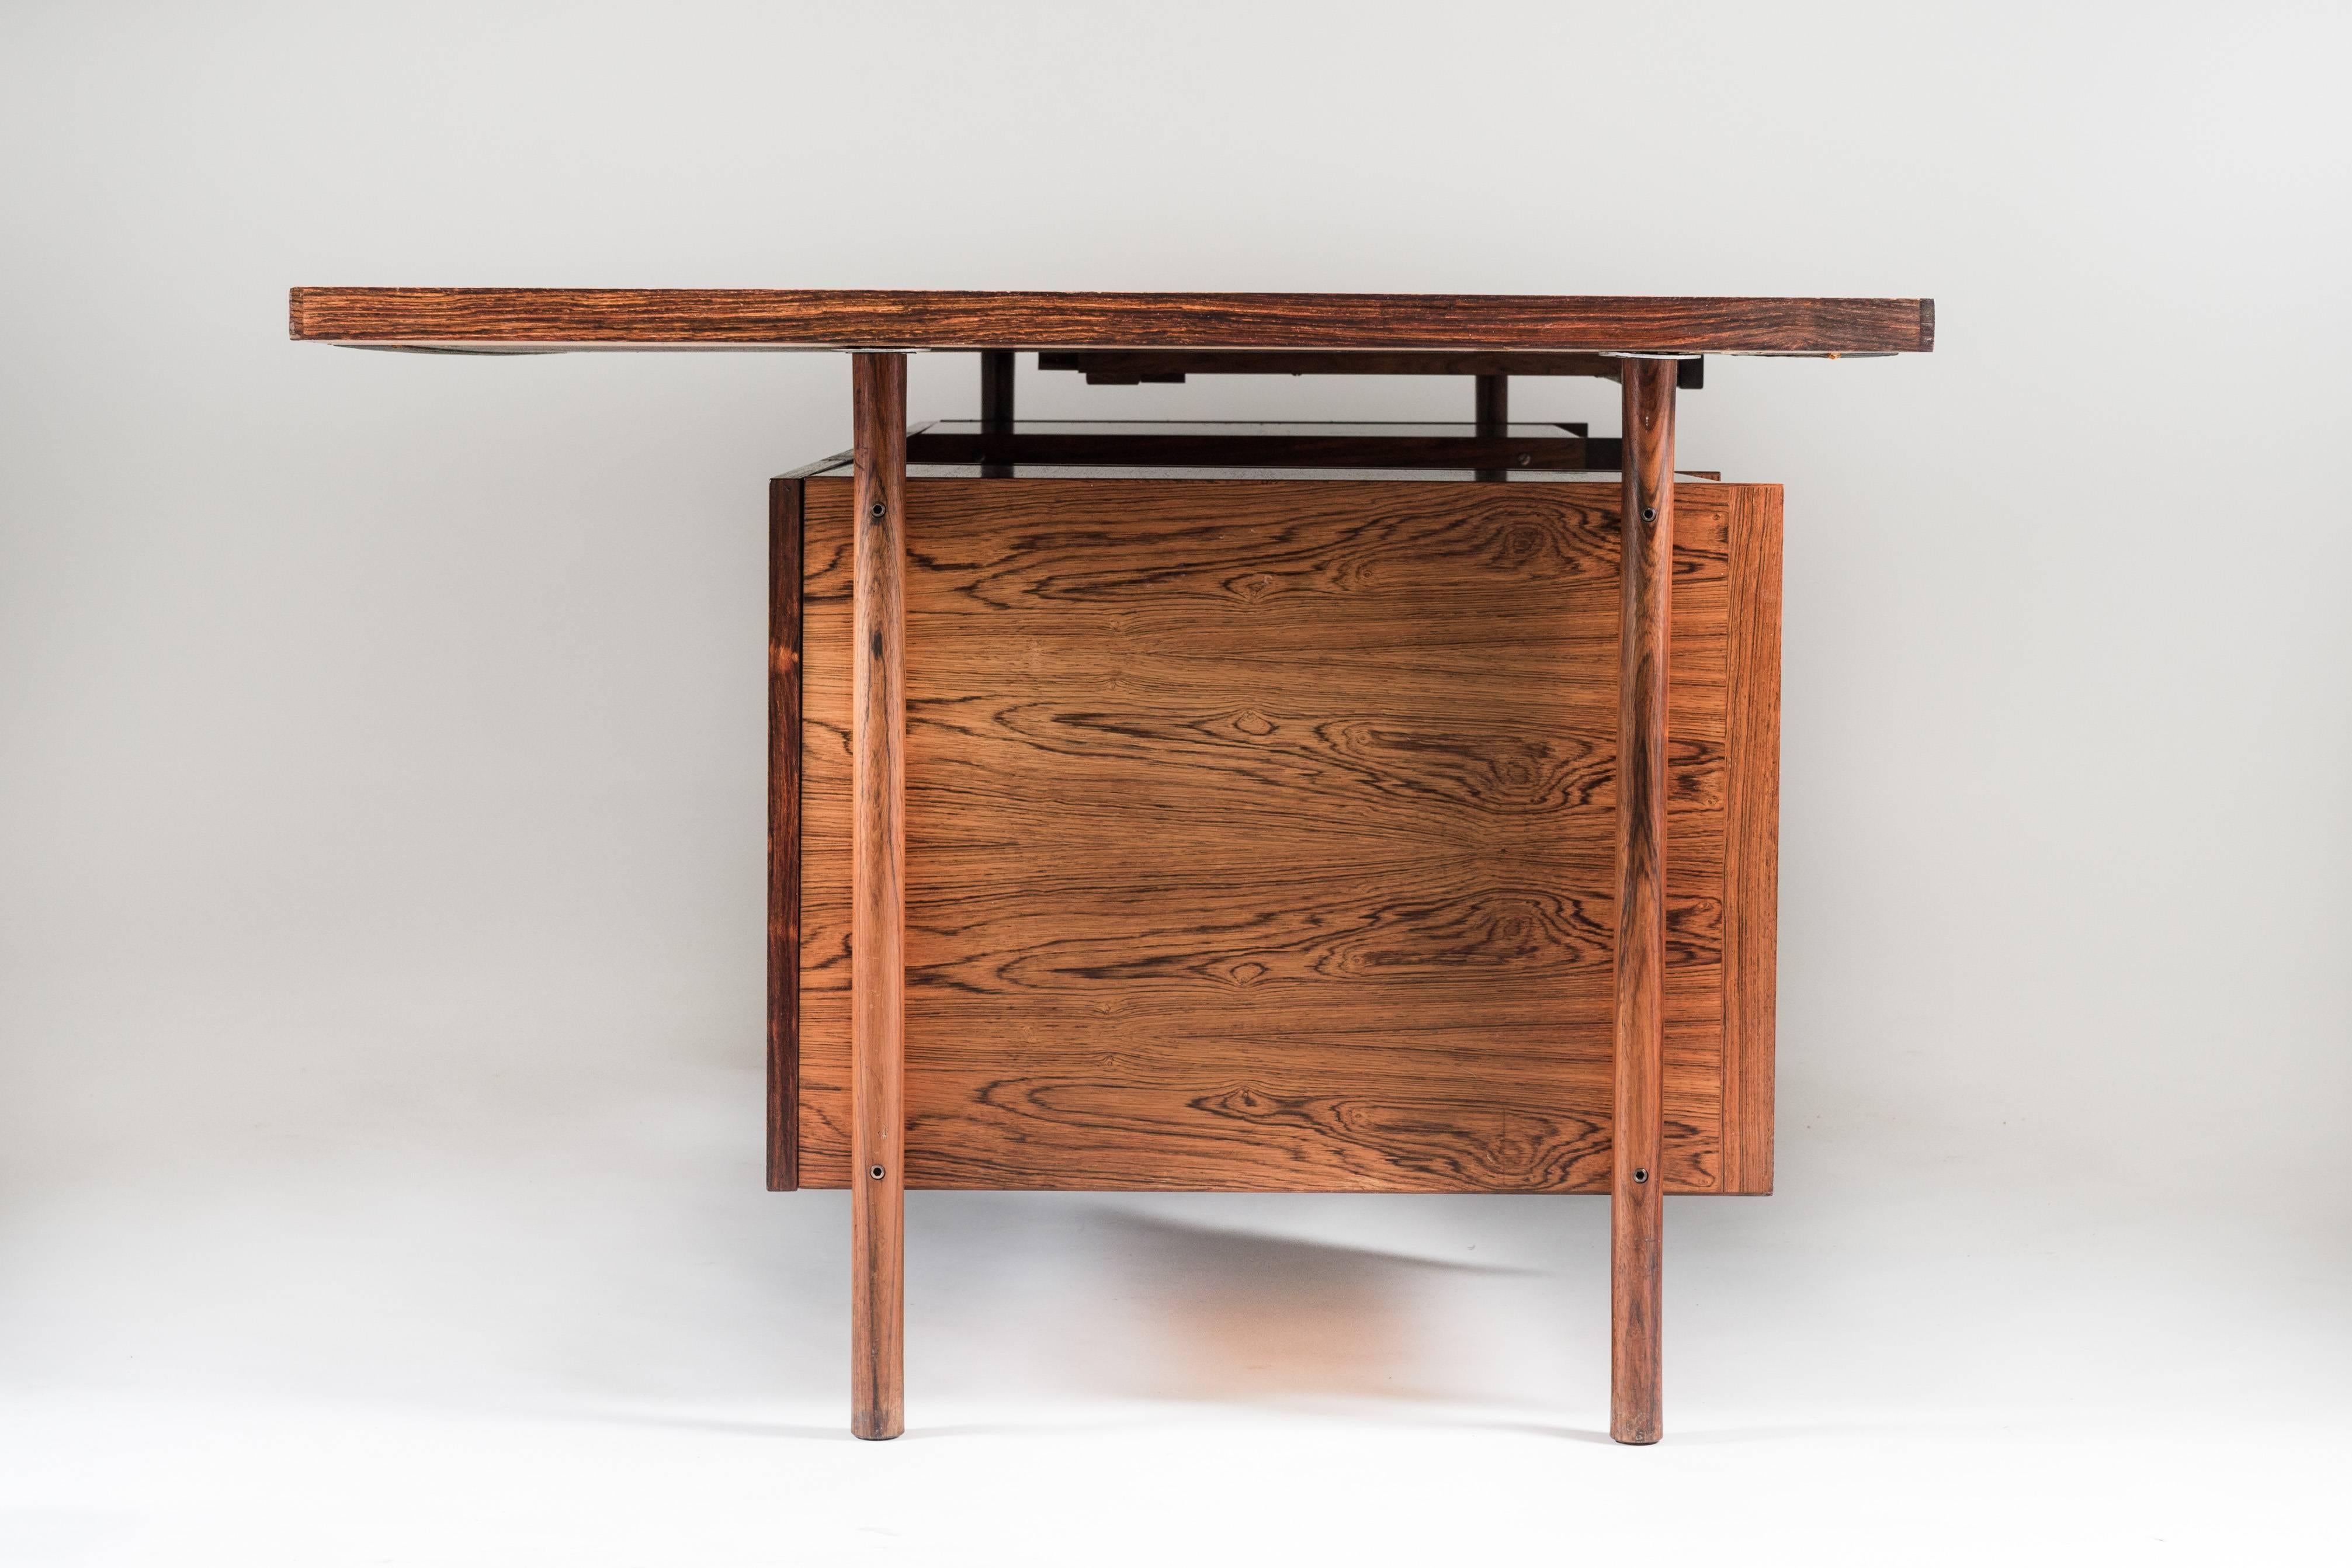 Scandinavian Modern Mid-Century Executive Desk In Rosewood and Leather by Sven Ivar Dysthe